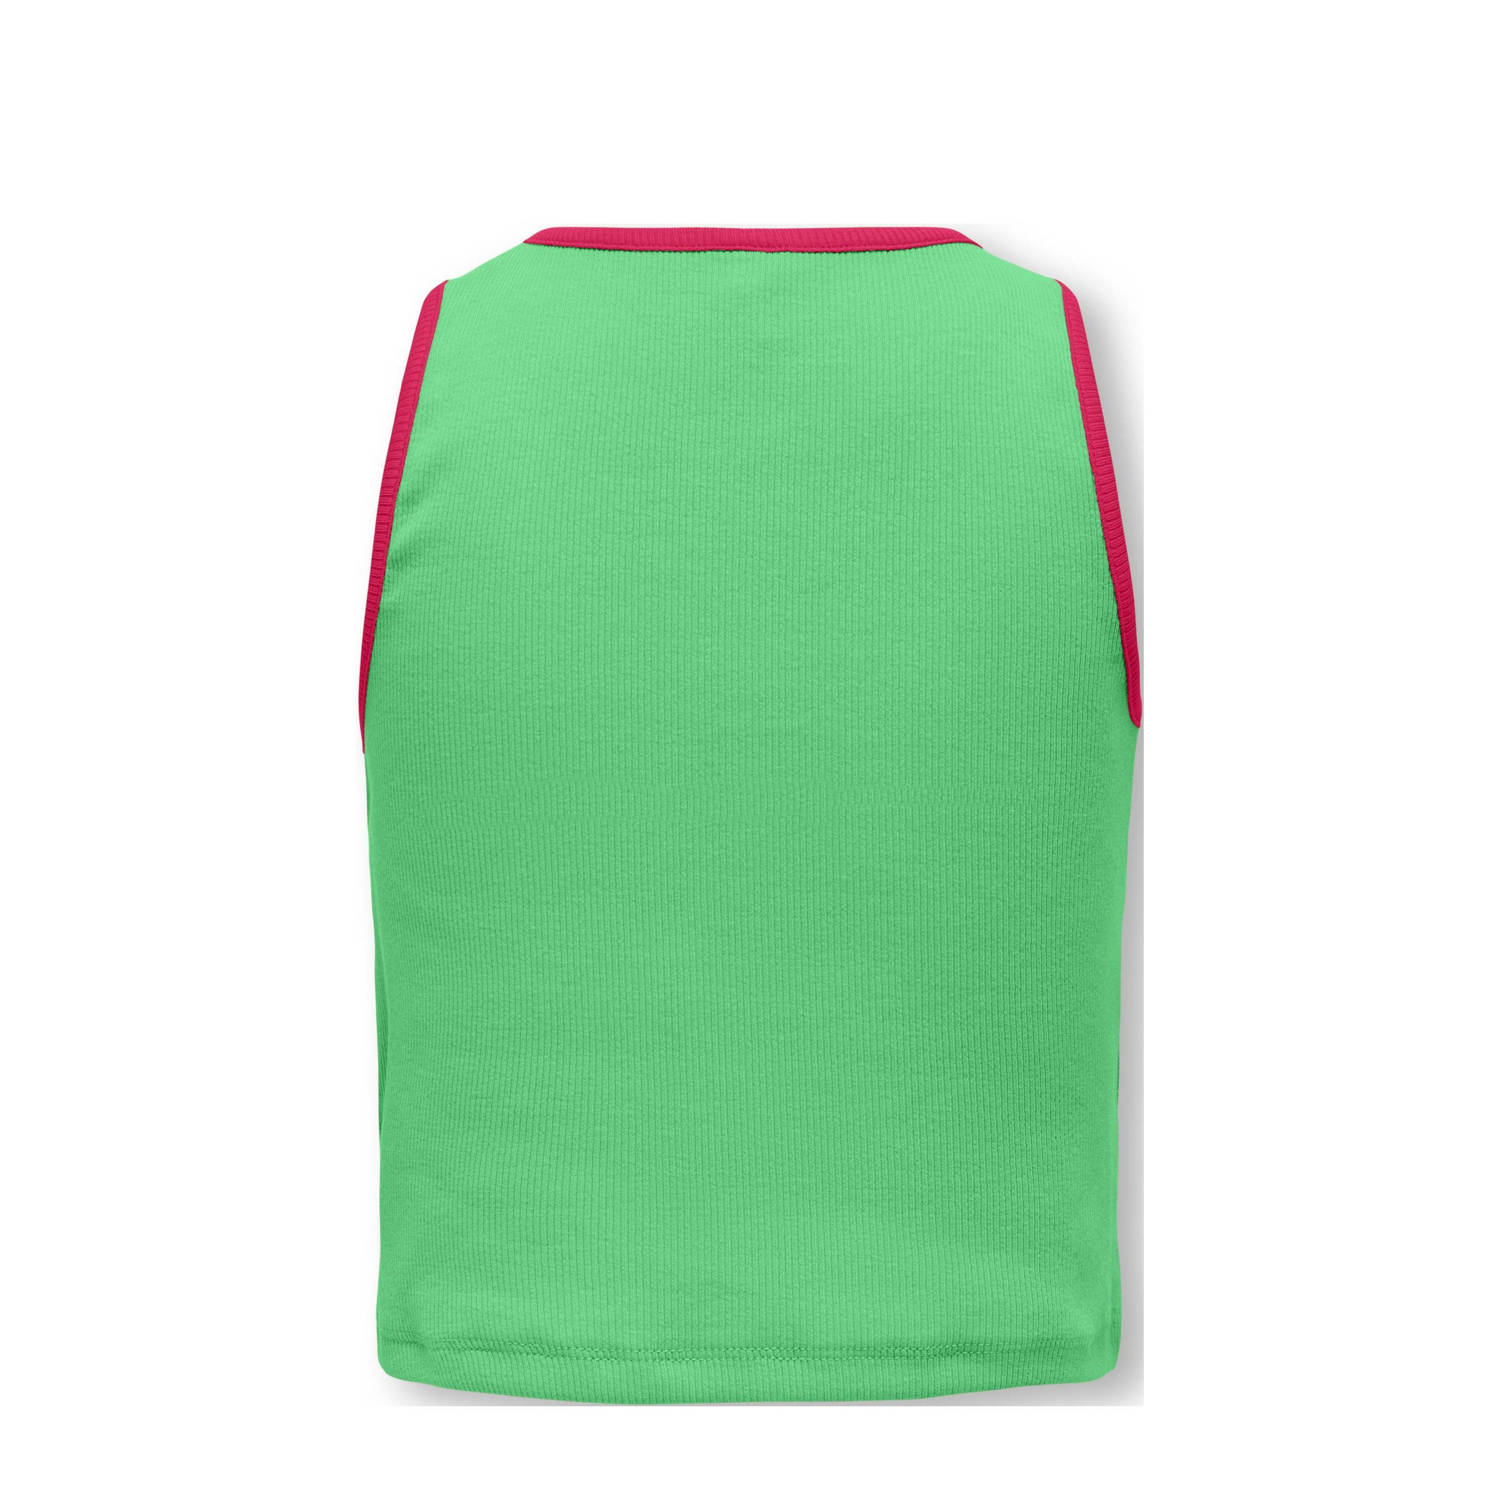 ONLY KIDS GIRL top KOGGRY fuchsia groen wit